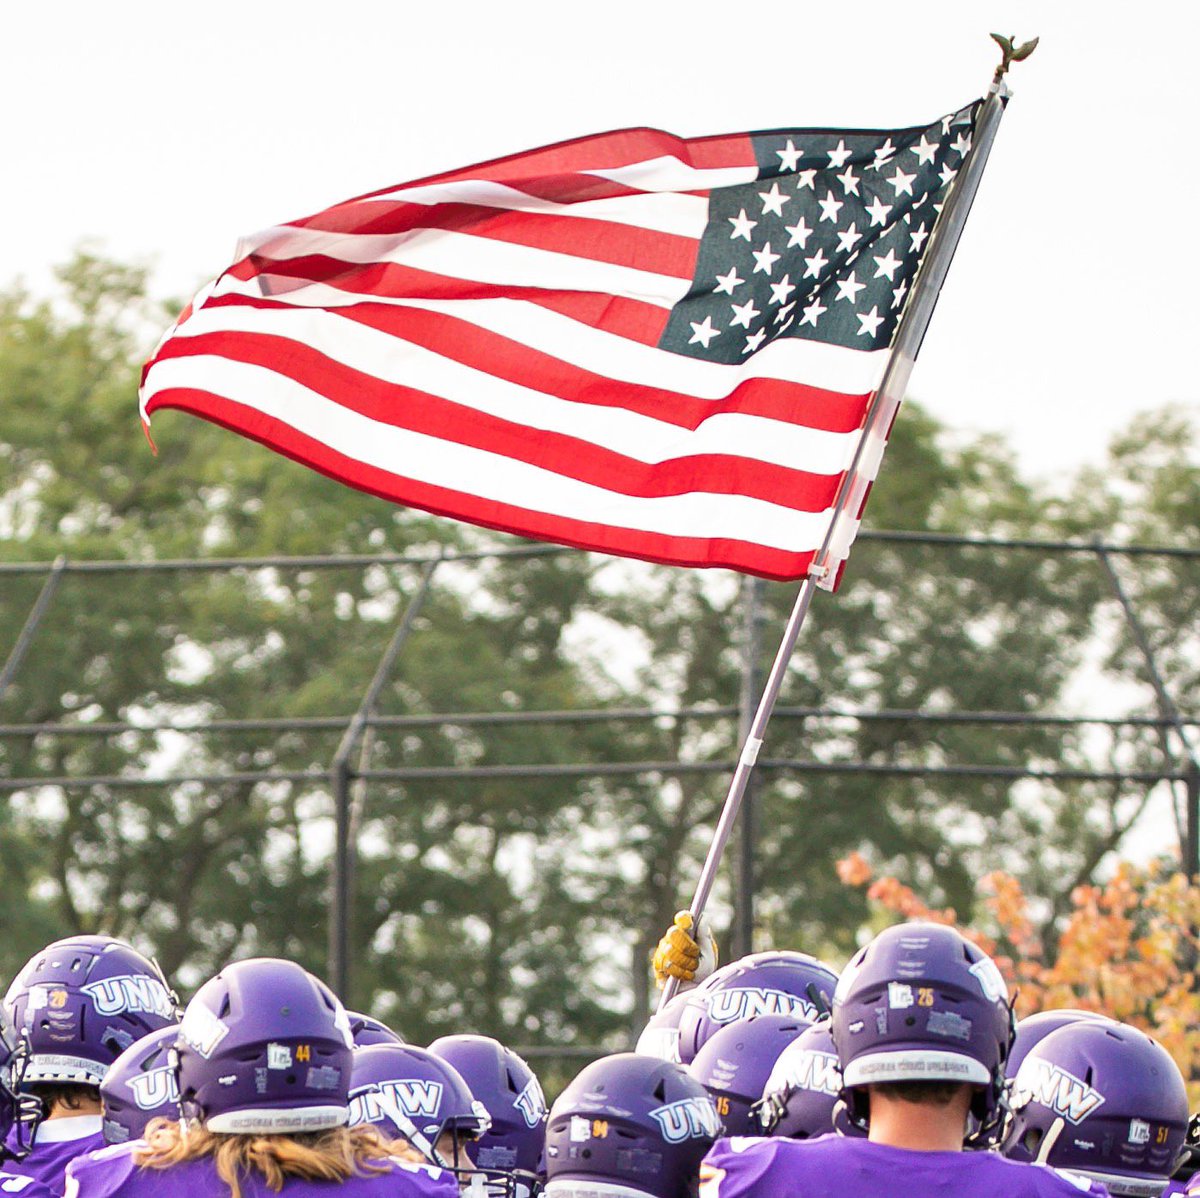 🇺🇸 #MemorialDay 🇺🇸 Today, we honor and remember those who made the ultimate sacrifice in service of our country. 

🦅 #CompeteWithPurpose #UNWnation